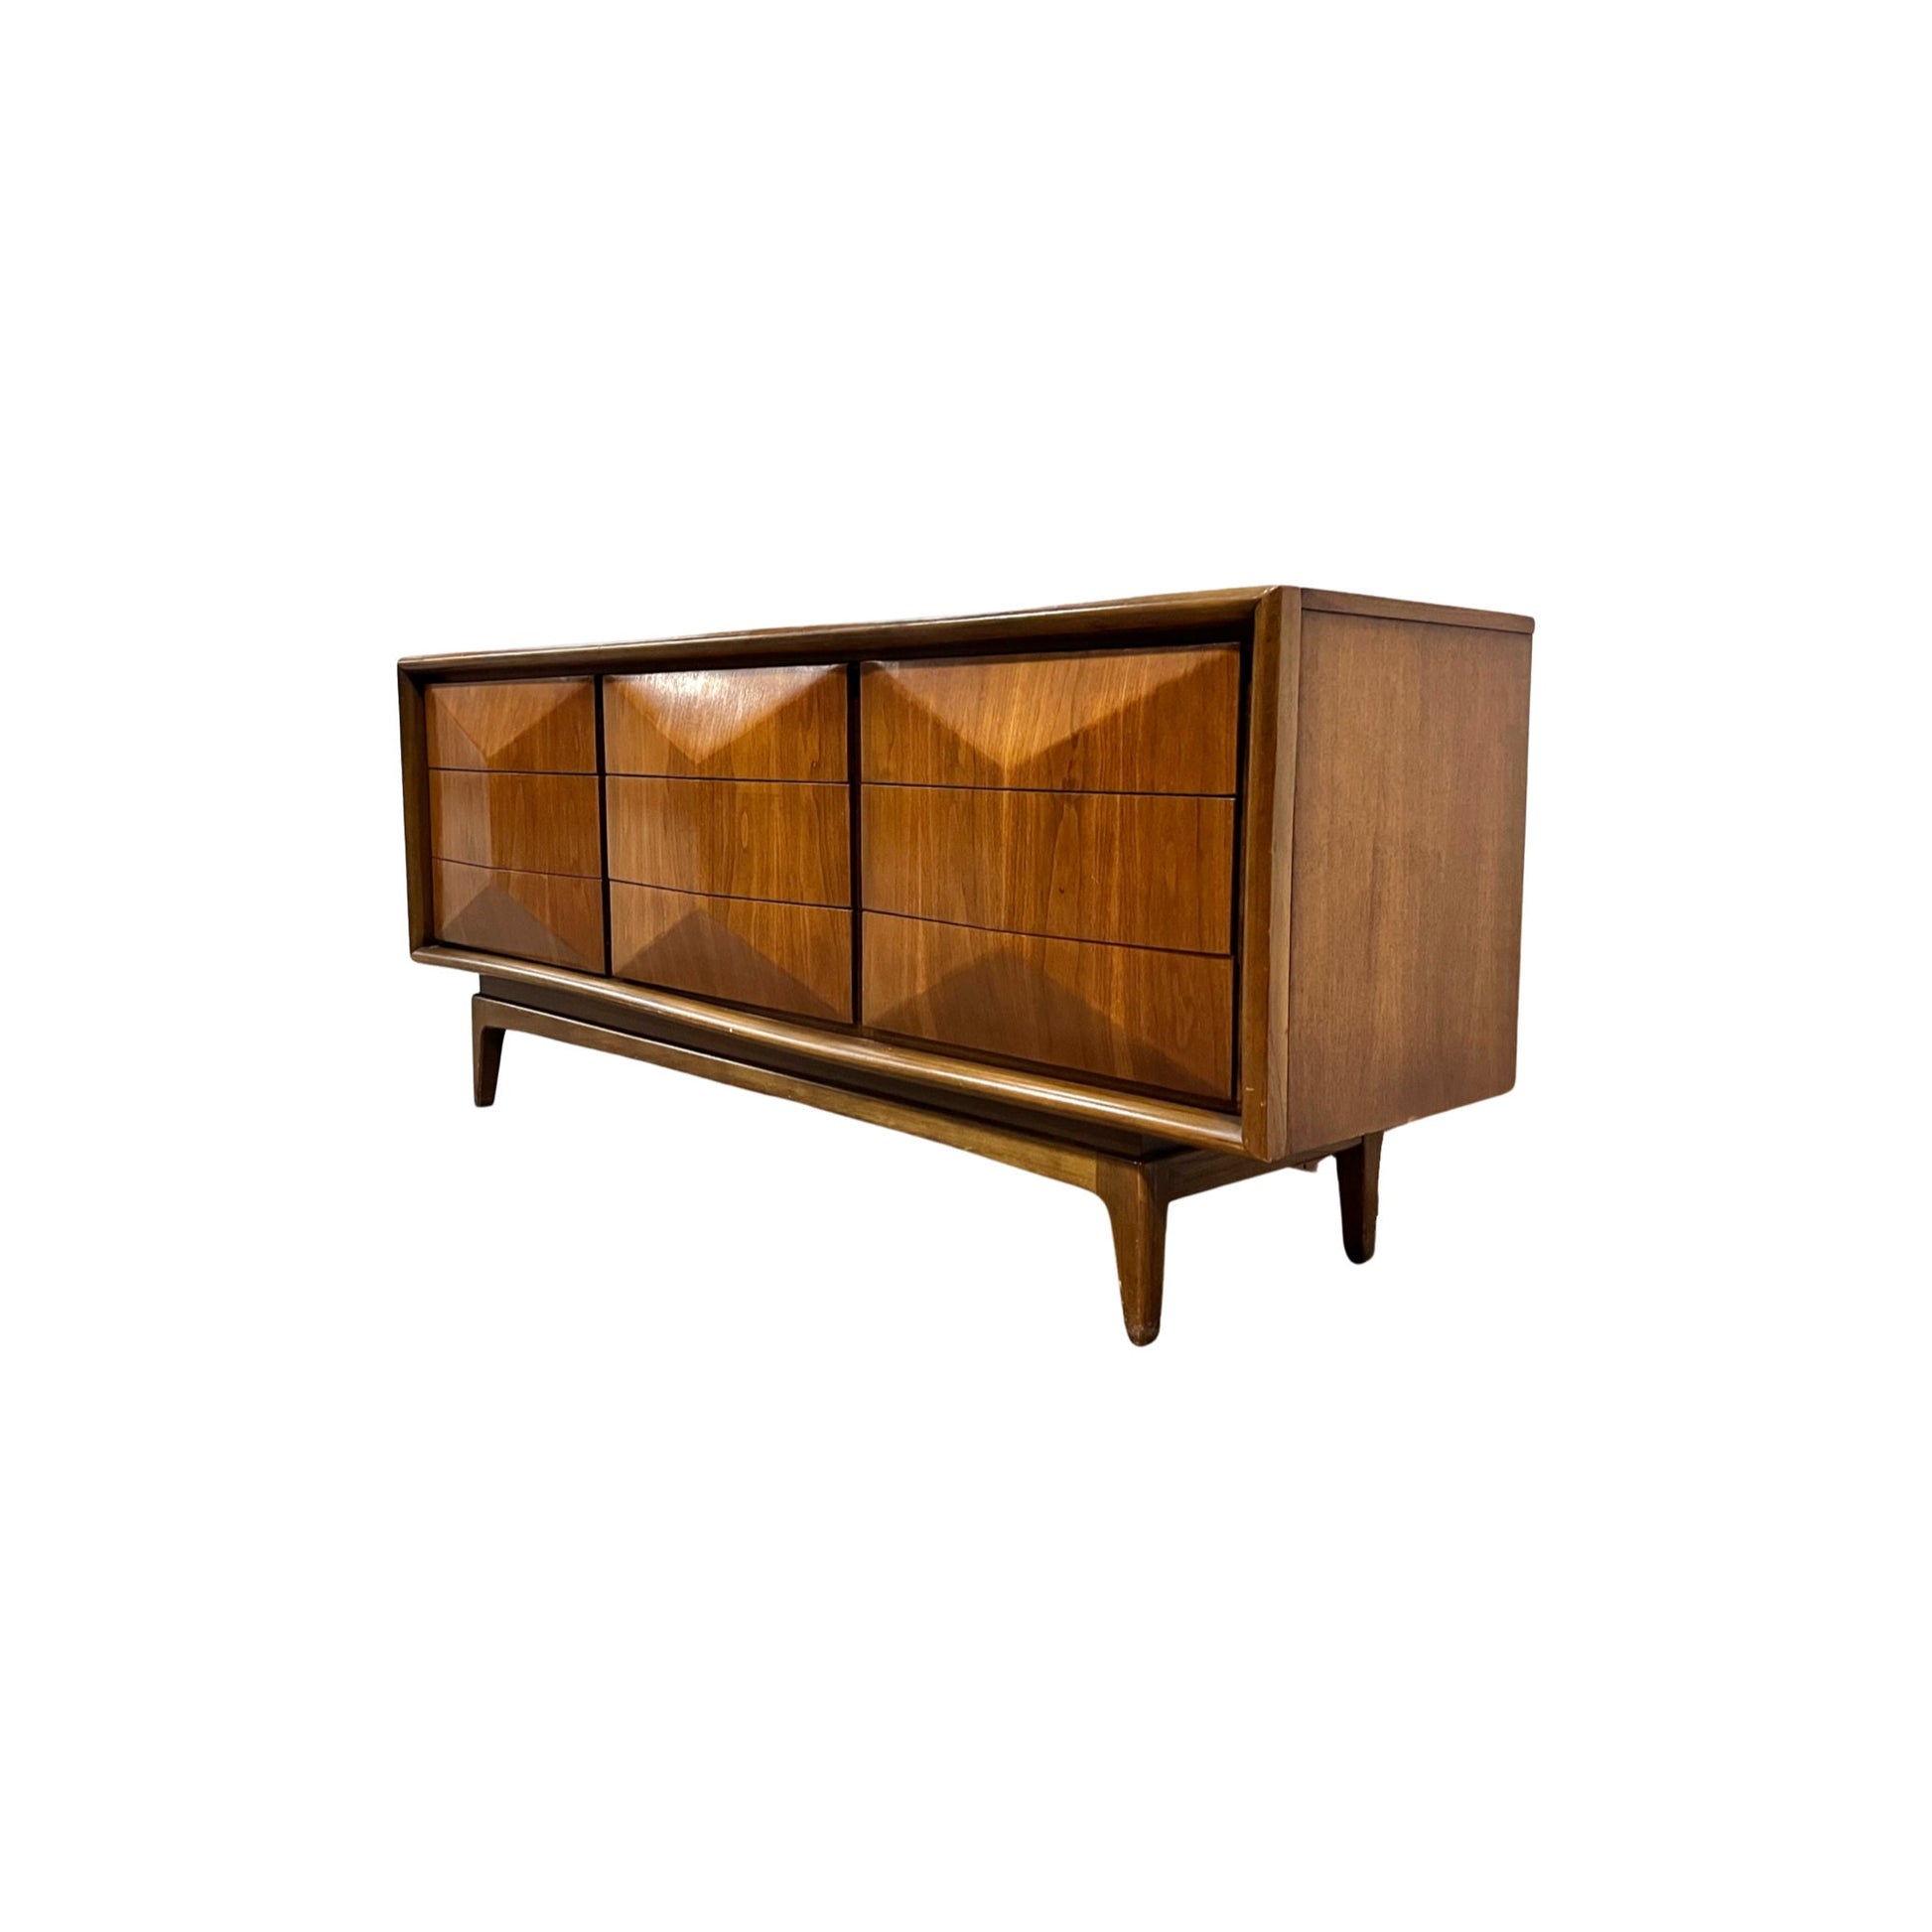 Nine Drawers with Artistic Diamond-Shaped Sections - United Furniture Co. Mid Century Modern Vintage Lowboy Dresser from the 1960s